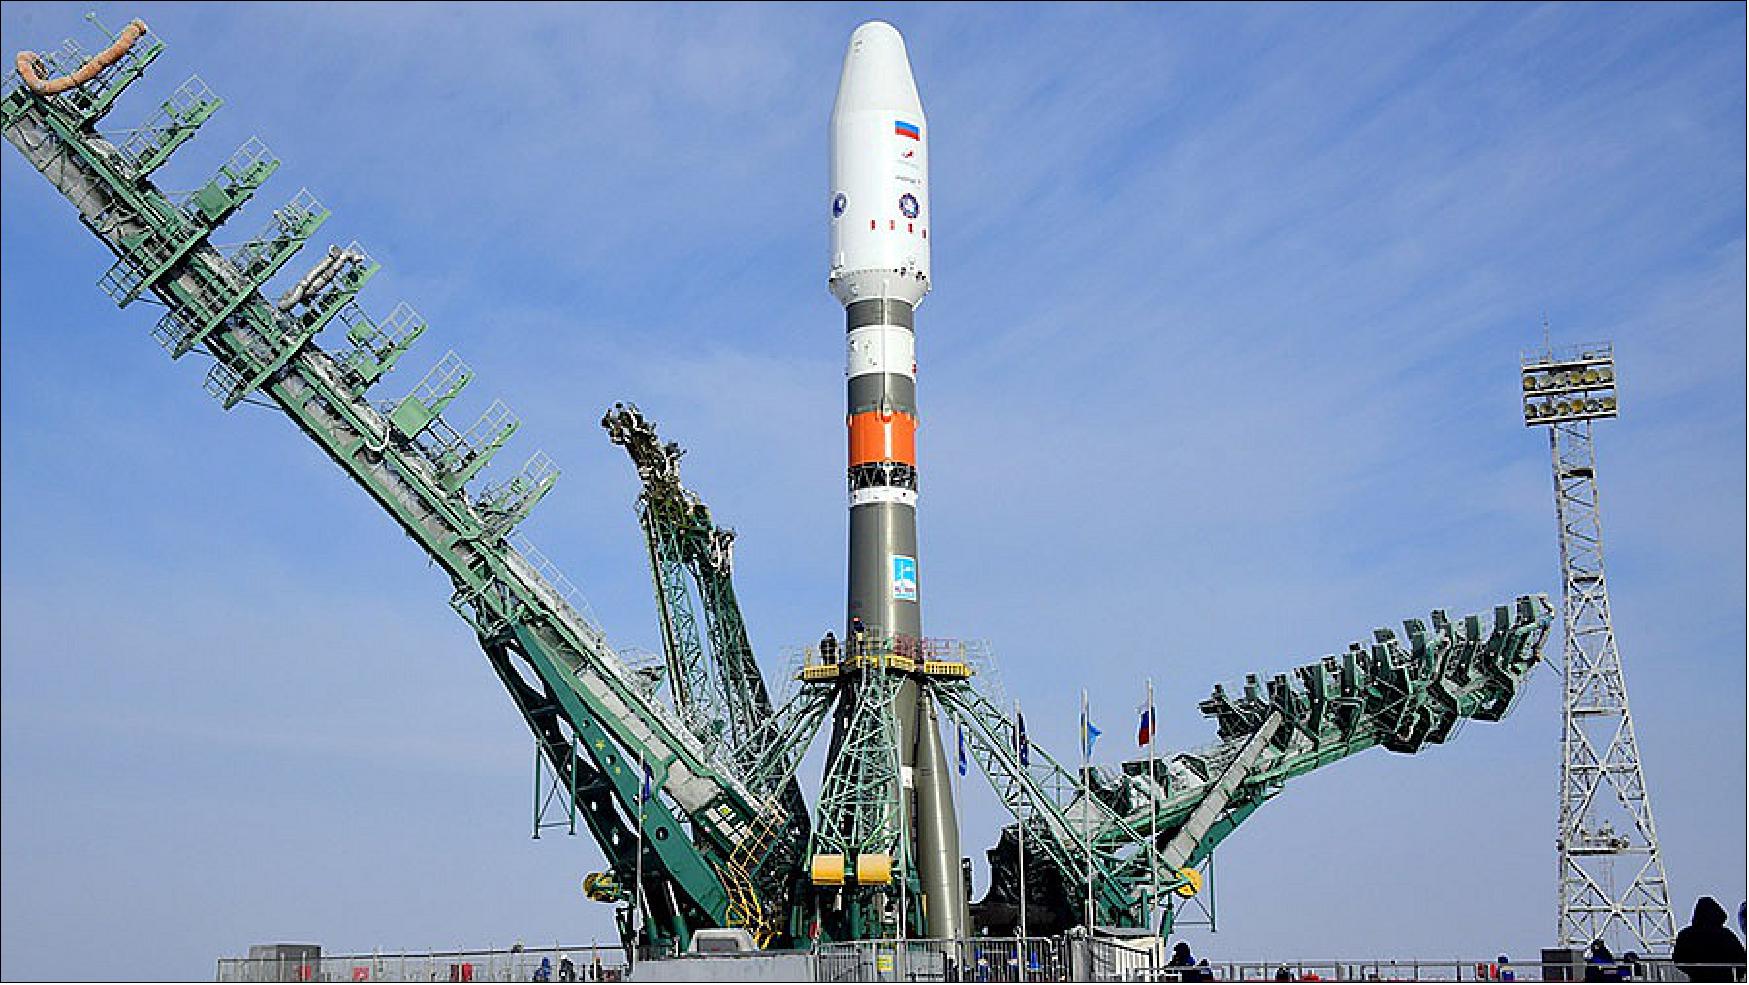 Figure 6: The Russian rocket with the Prichal docking module atop stands vertical at the Baikonur Cosmodrome launch pad in Kazakhstan (image credit: Roscosmos)